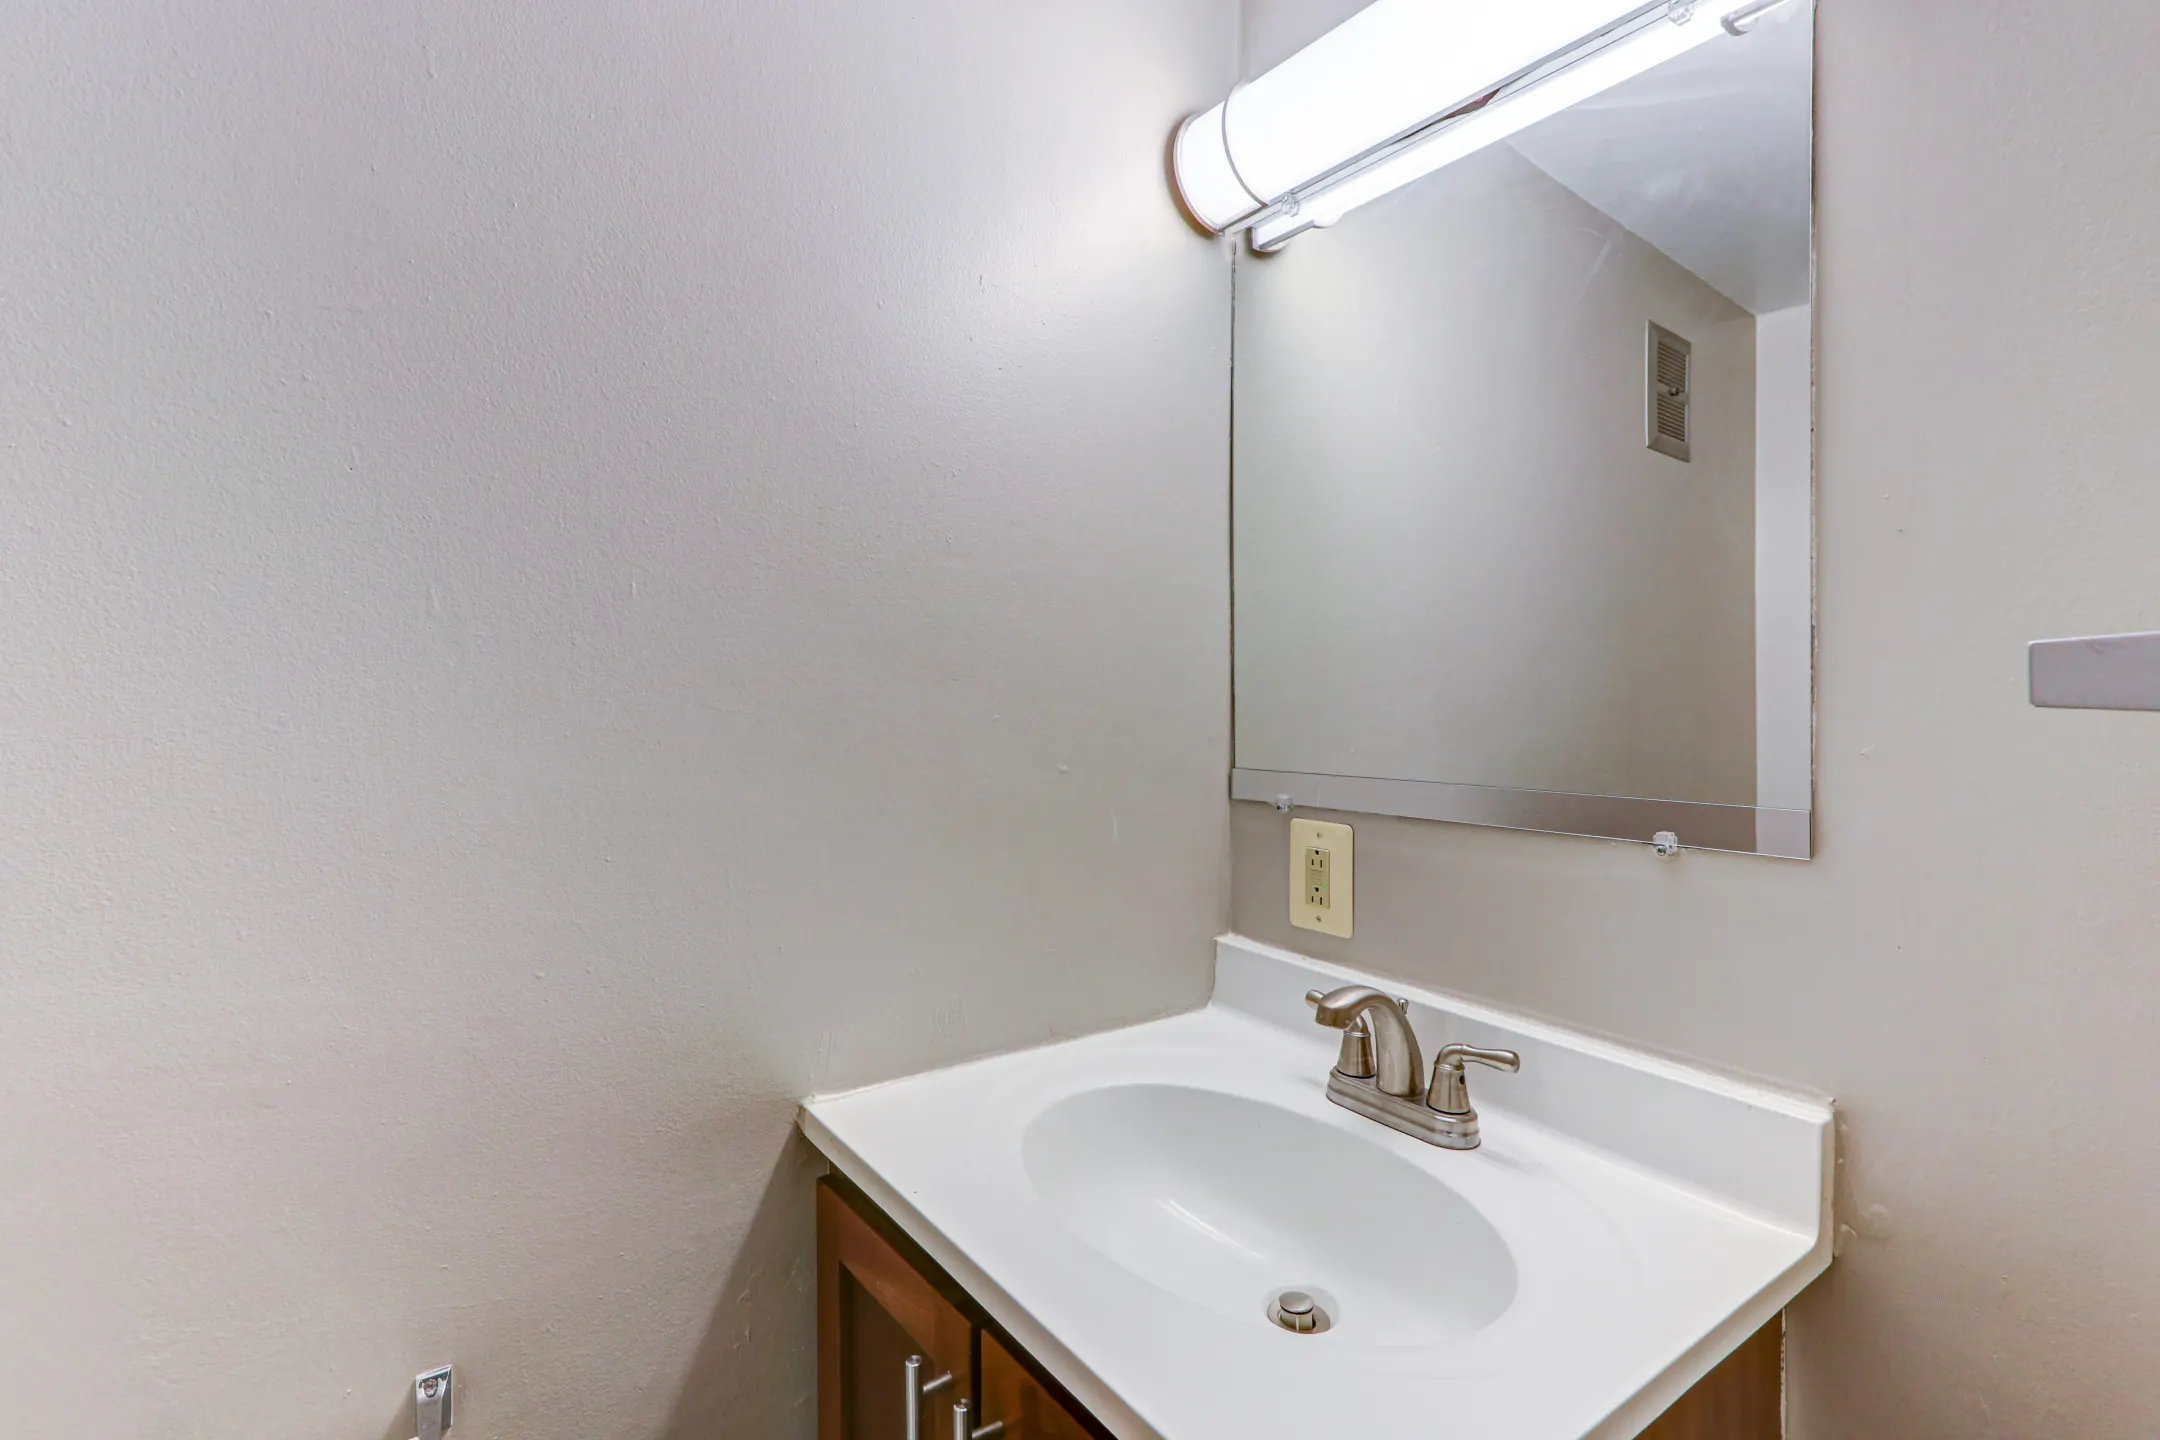 Bathroom - Carriage Park Apartments - Pittsburgh, PA